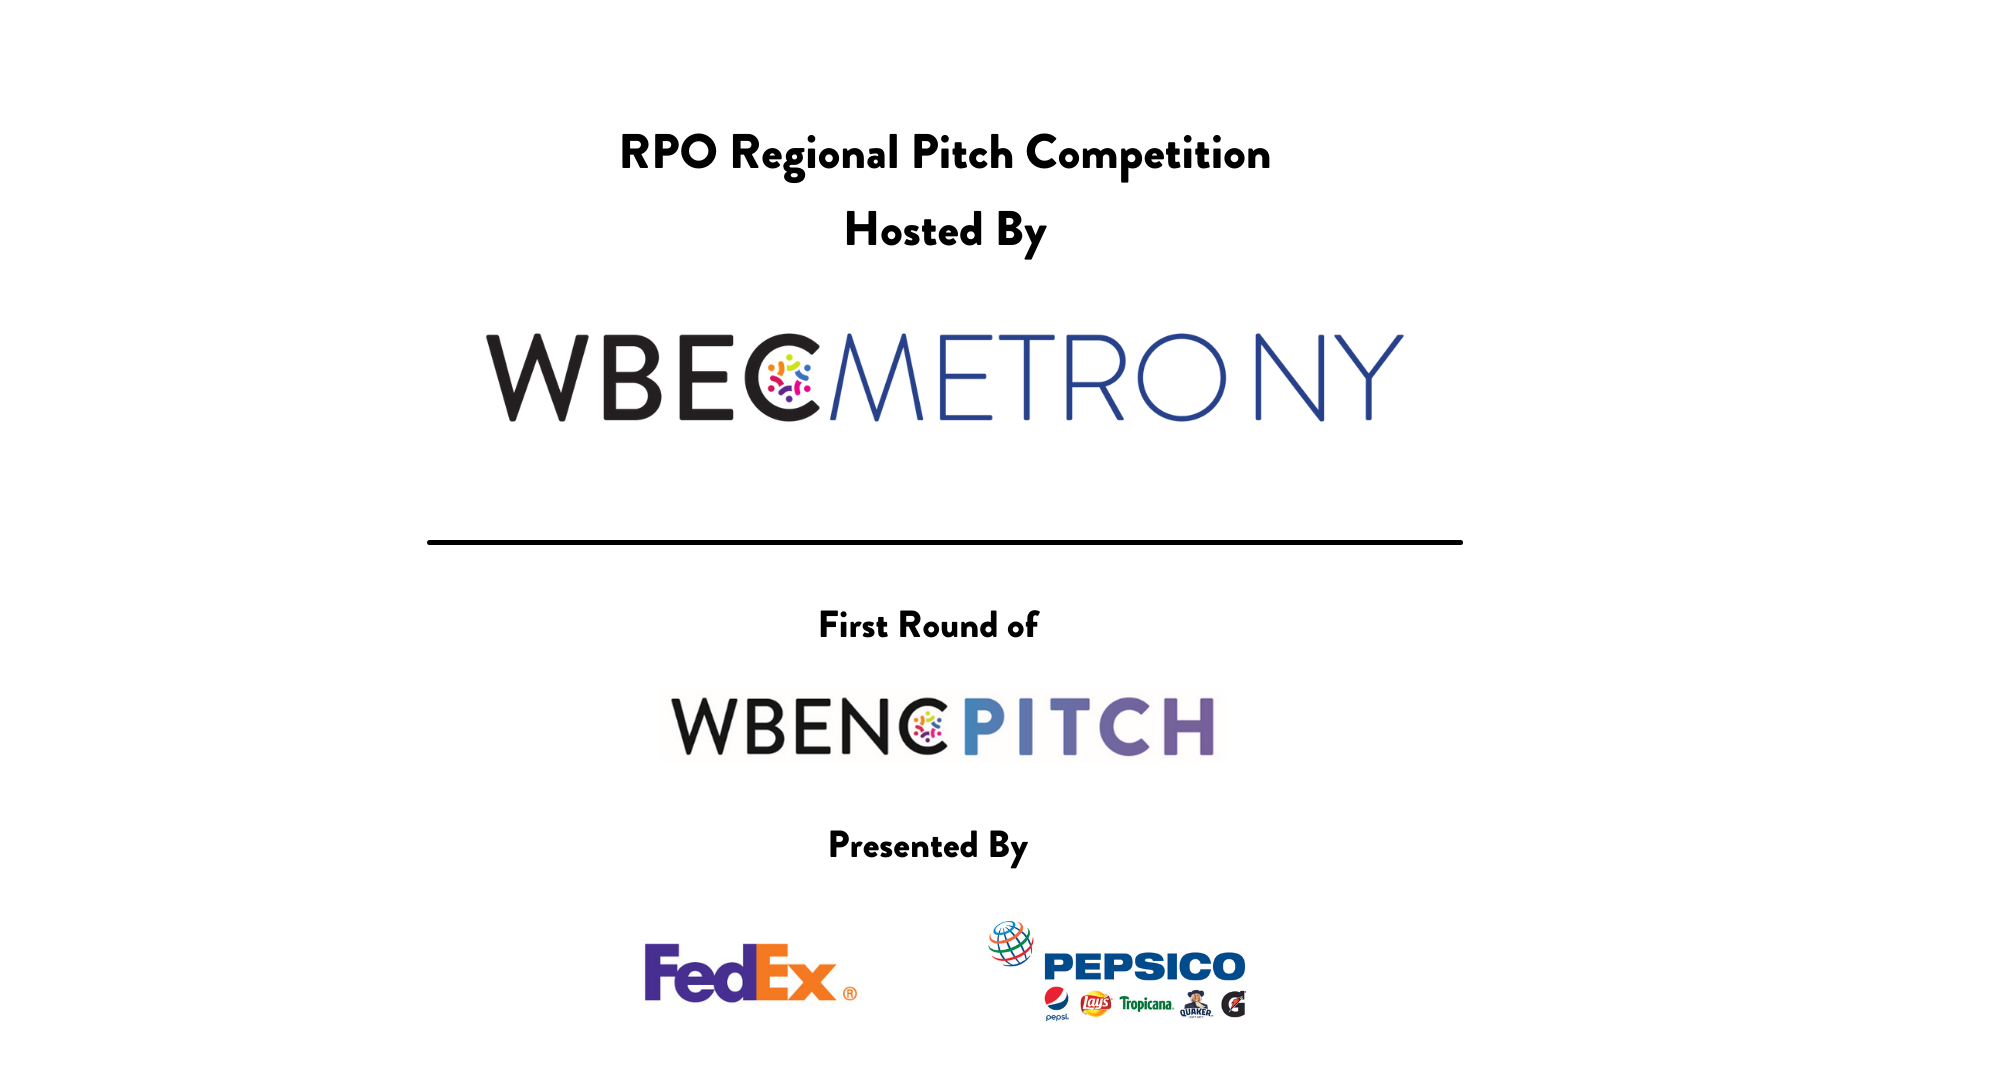 WBEC Metro NY Pitch Competition